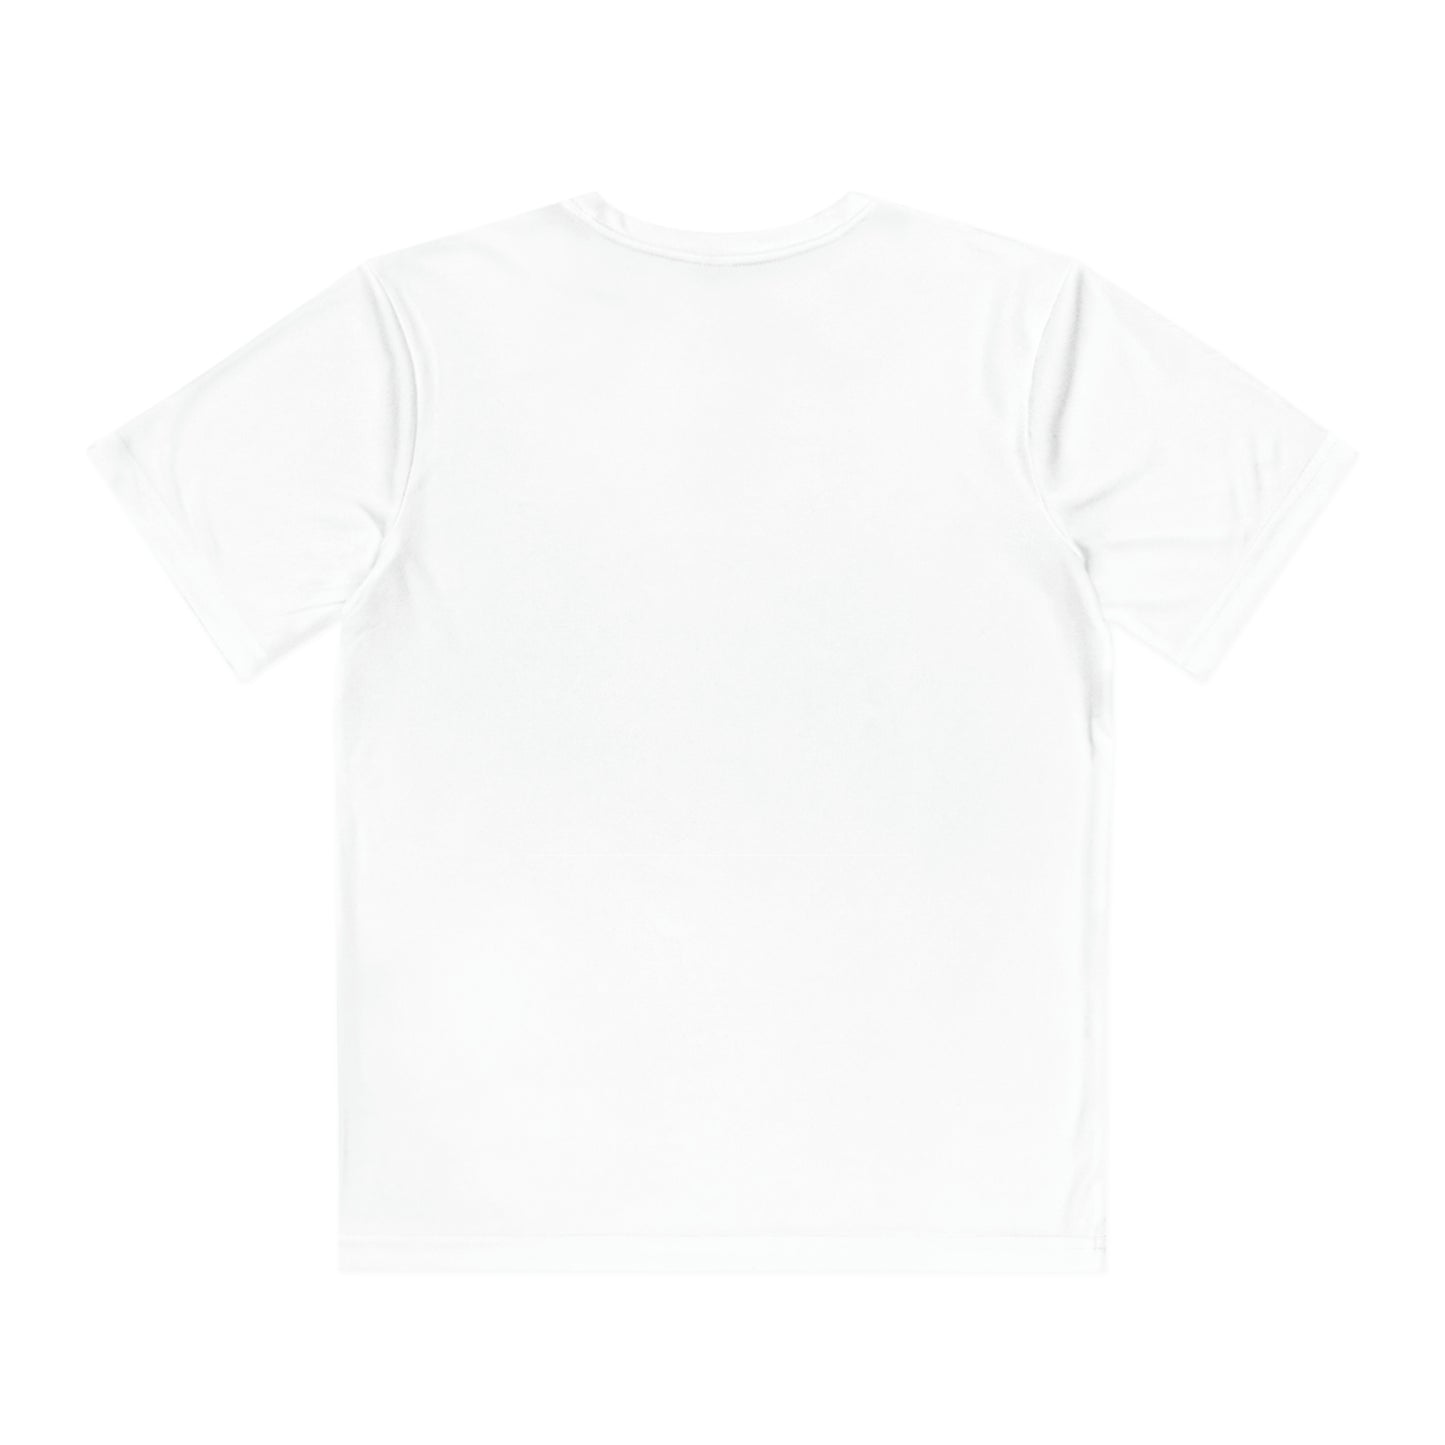 Youth Flag Dry-Fit Tee [Design 4]